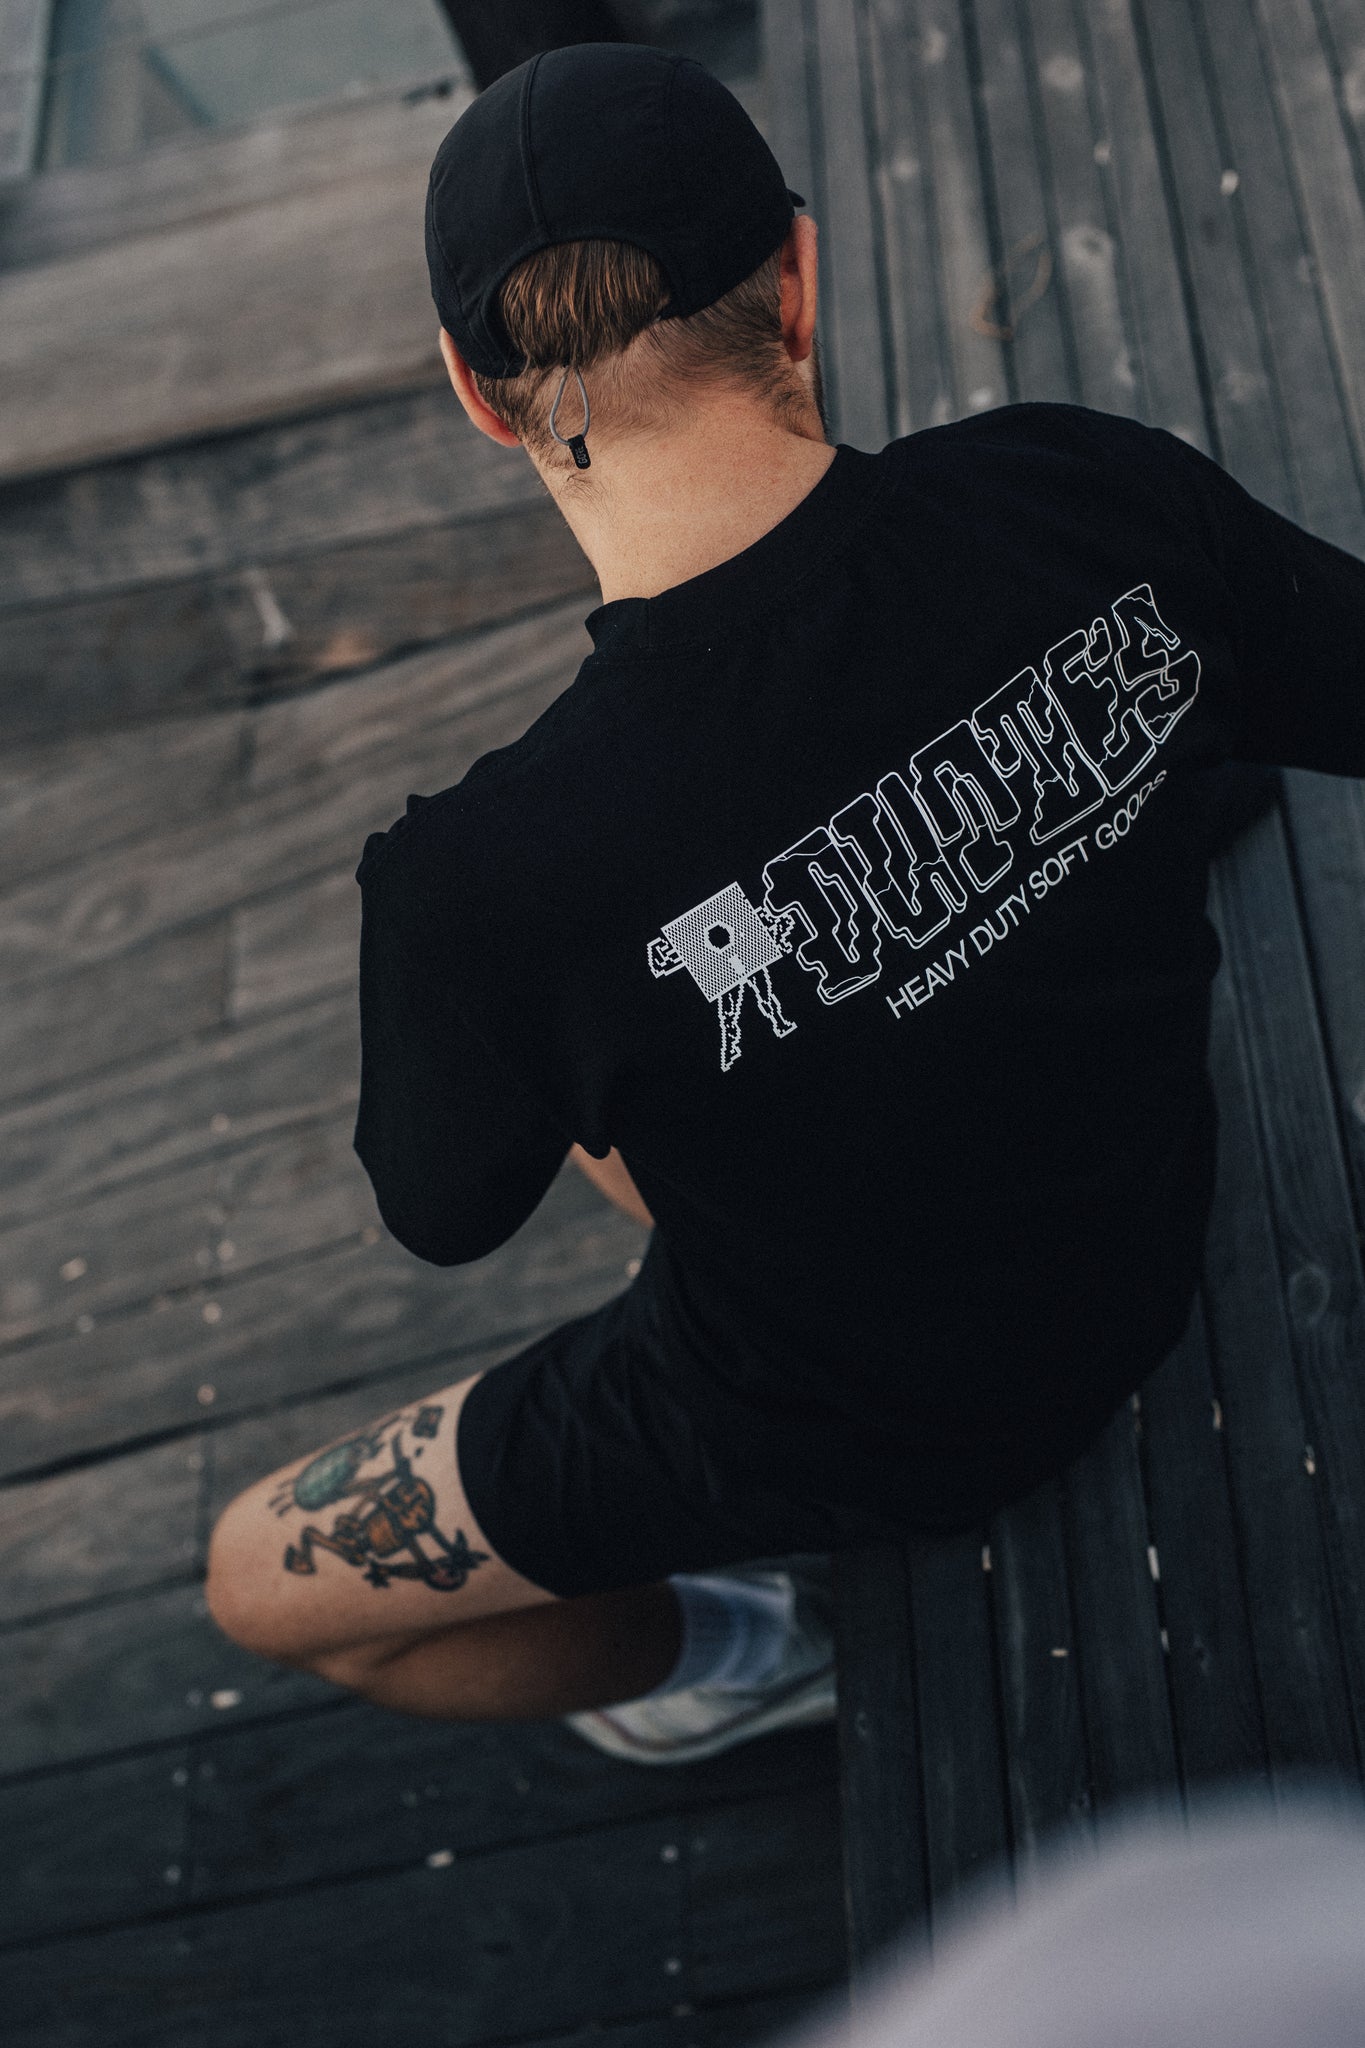 Man sitting outdoors with his back to the camera, showcasing the white Tuff Tee print on the back of a black T-shirt.